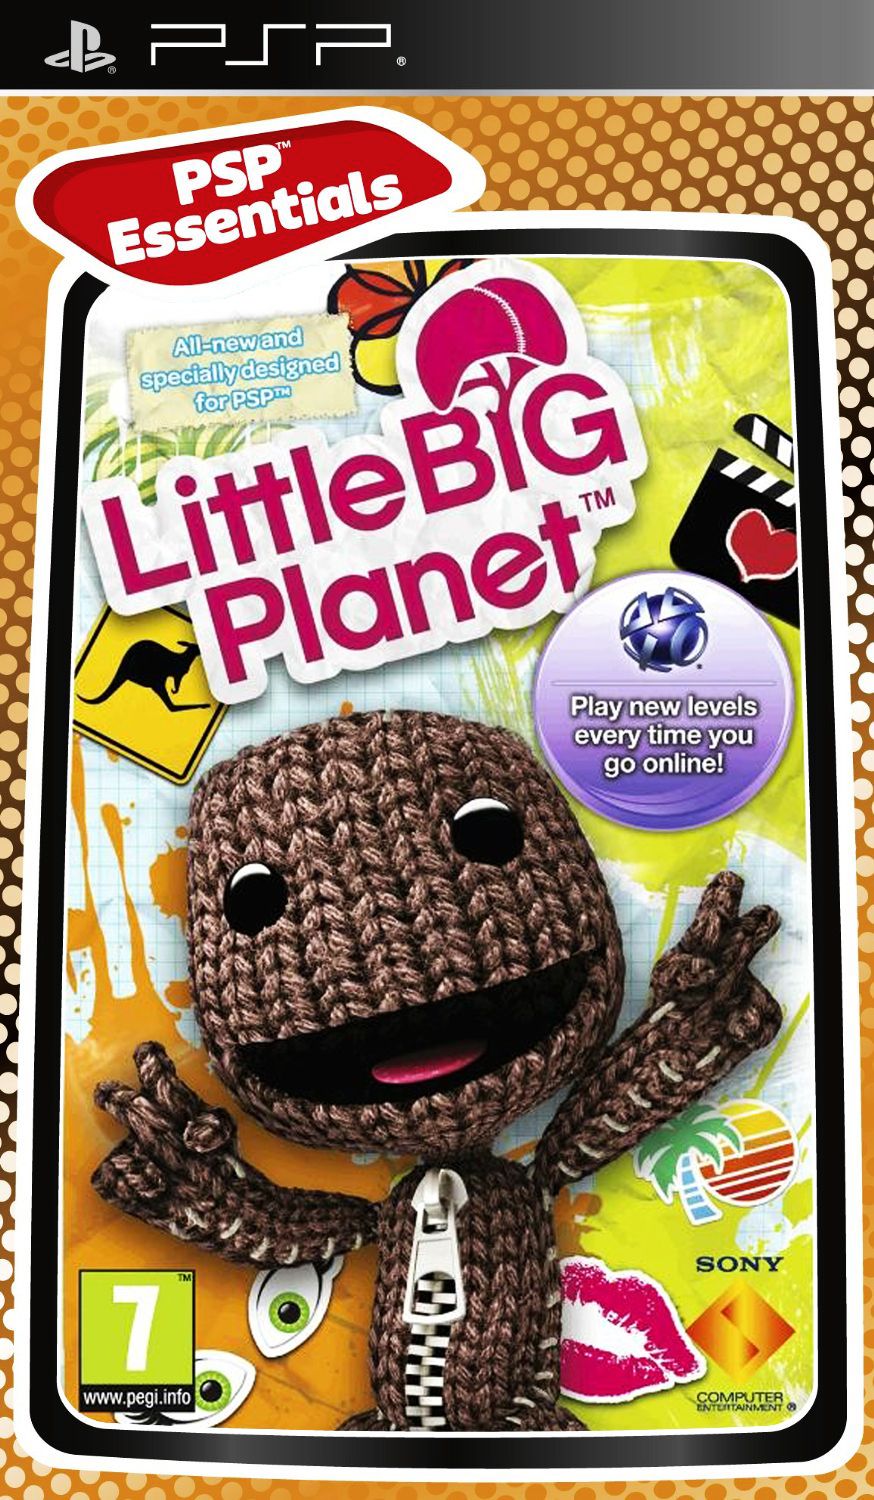 LittleBigPlanet (PSP)(Pwned) | Buy from Pwned Games with ...